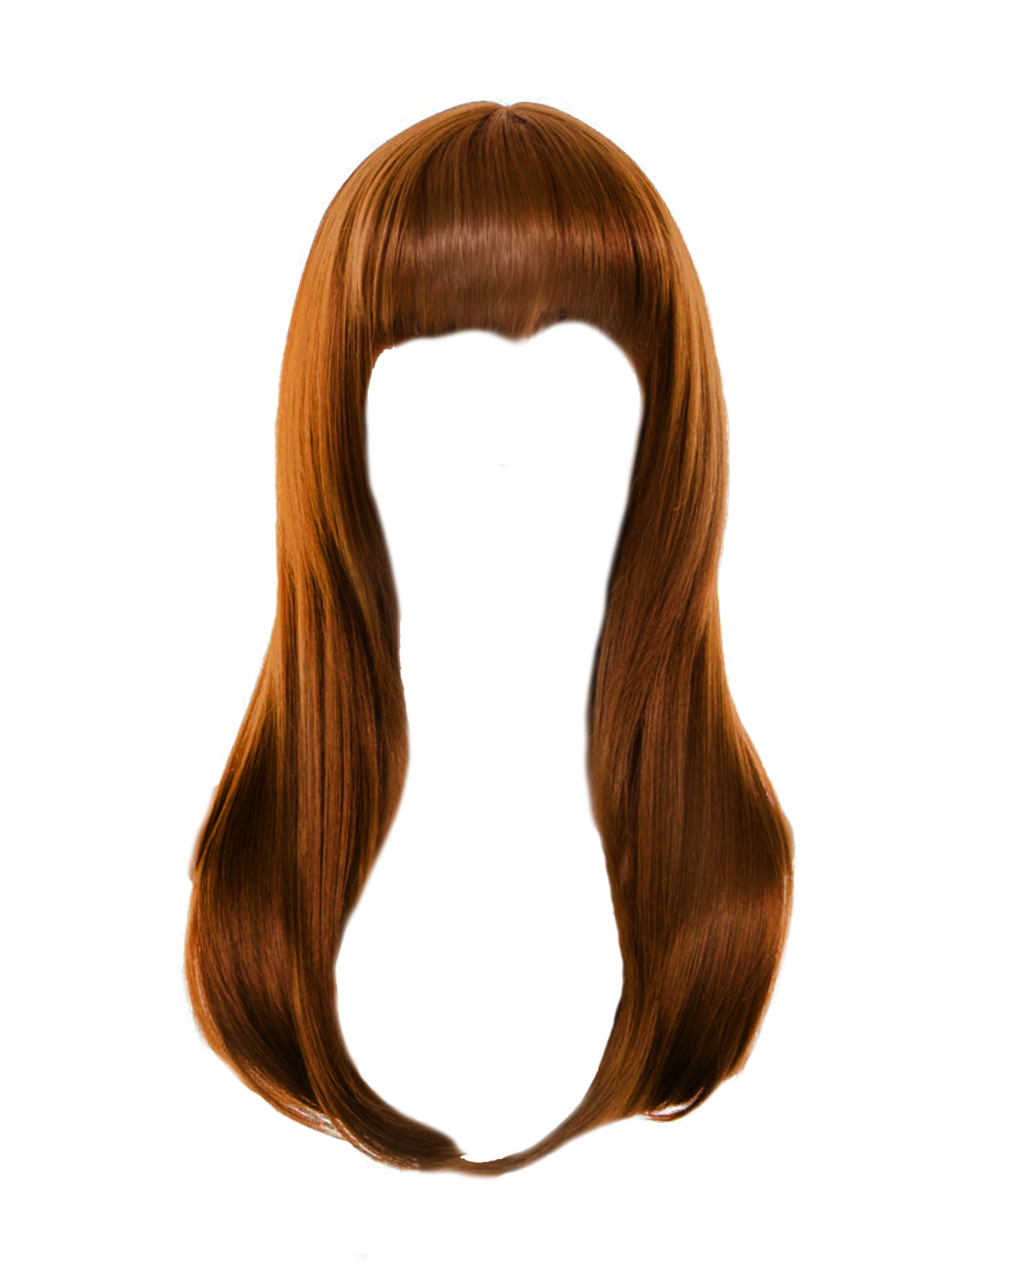 Girl Hairstyle Free Download Image PNG Image